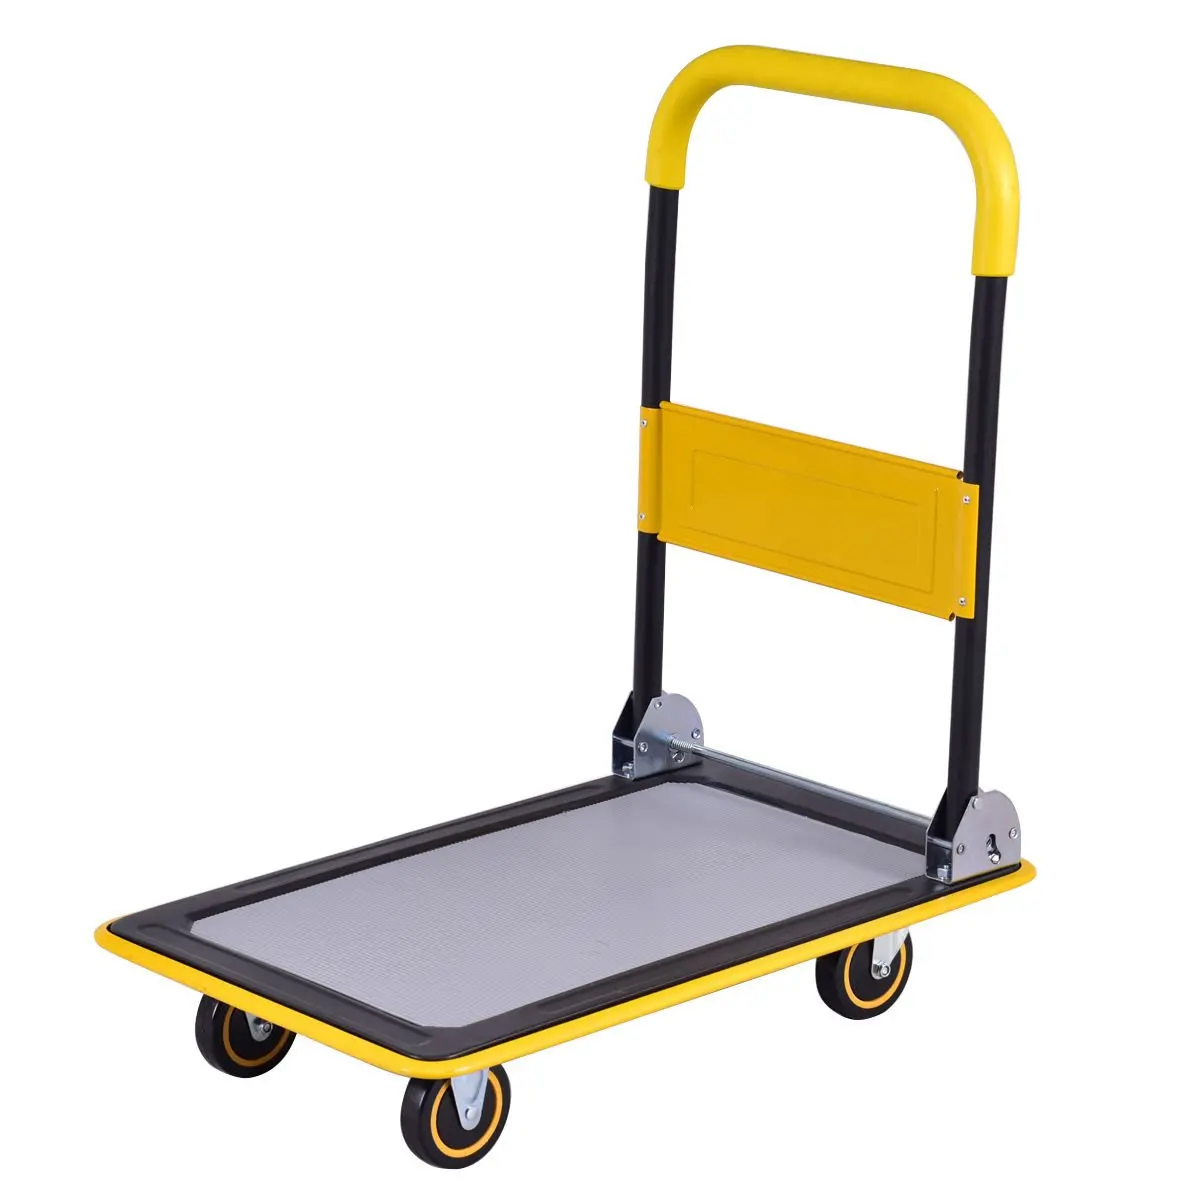 Cheap Flatbed Cart Find Flatbed Cart Deals On Line At